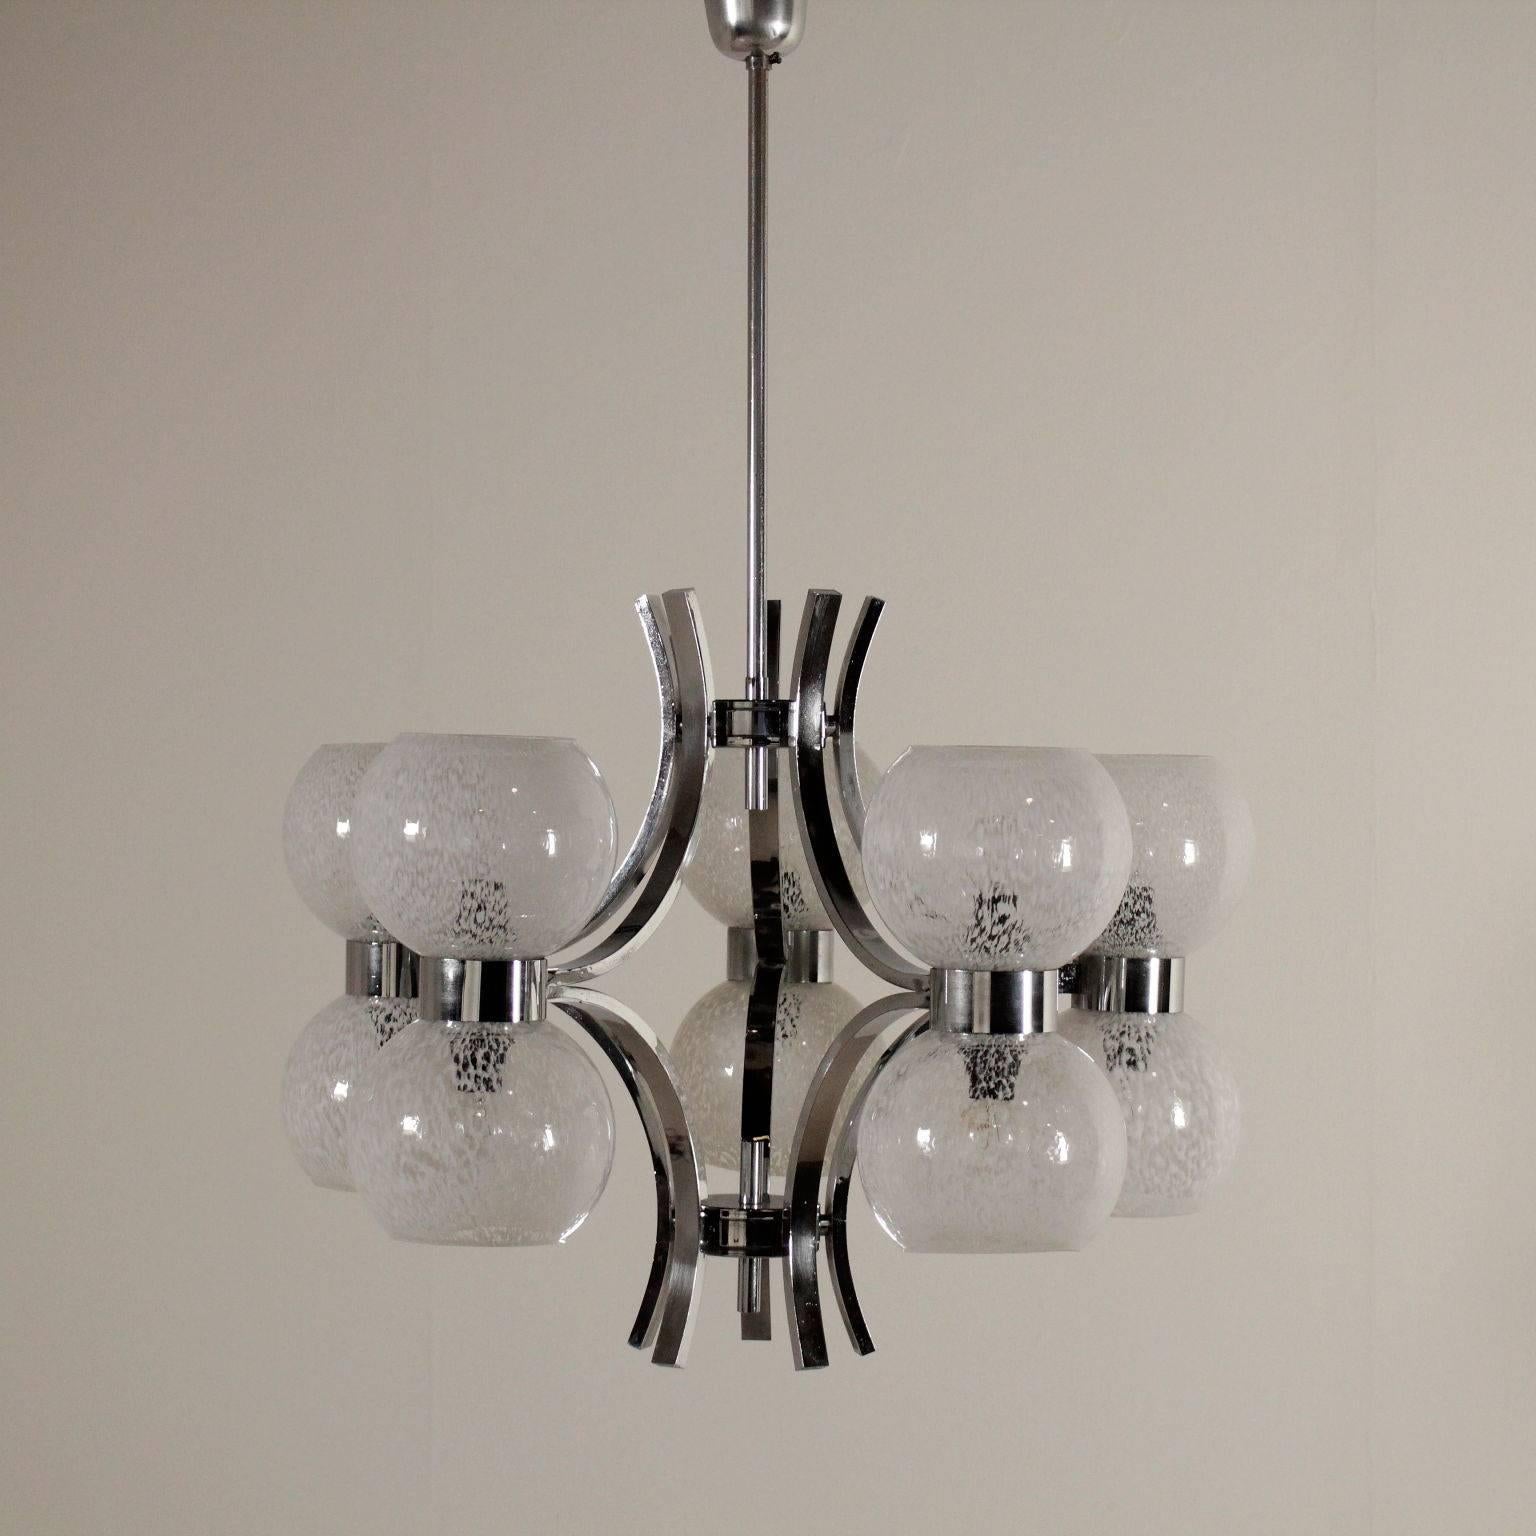 A ceiling lamp, chromed metal and glass. Manufactured in Italy, 1960s-1970s.